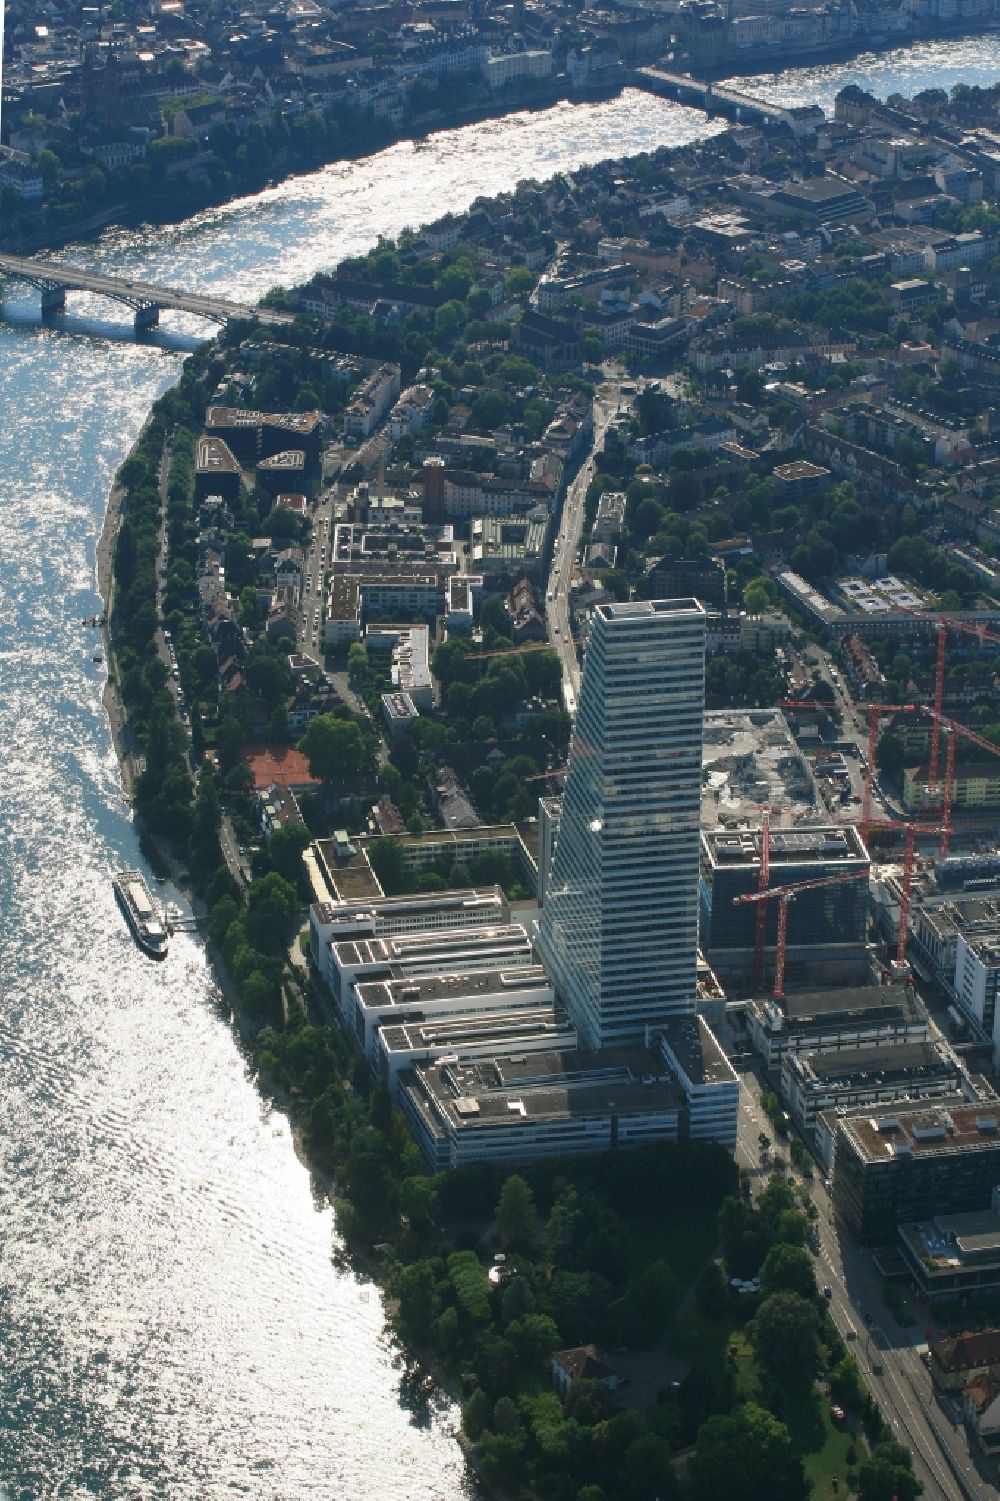 Aerial image Basel - Factory premises of the pharmaceutical company Roche with the landmark building and skyscraper in Basel in Switzerland